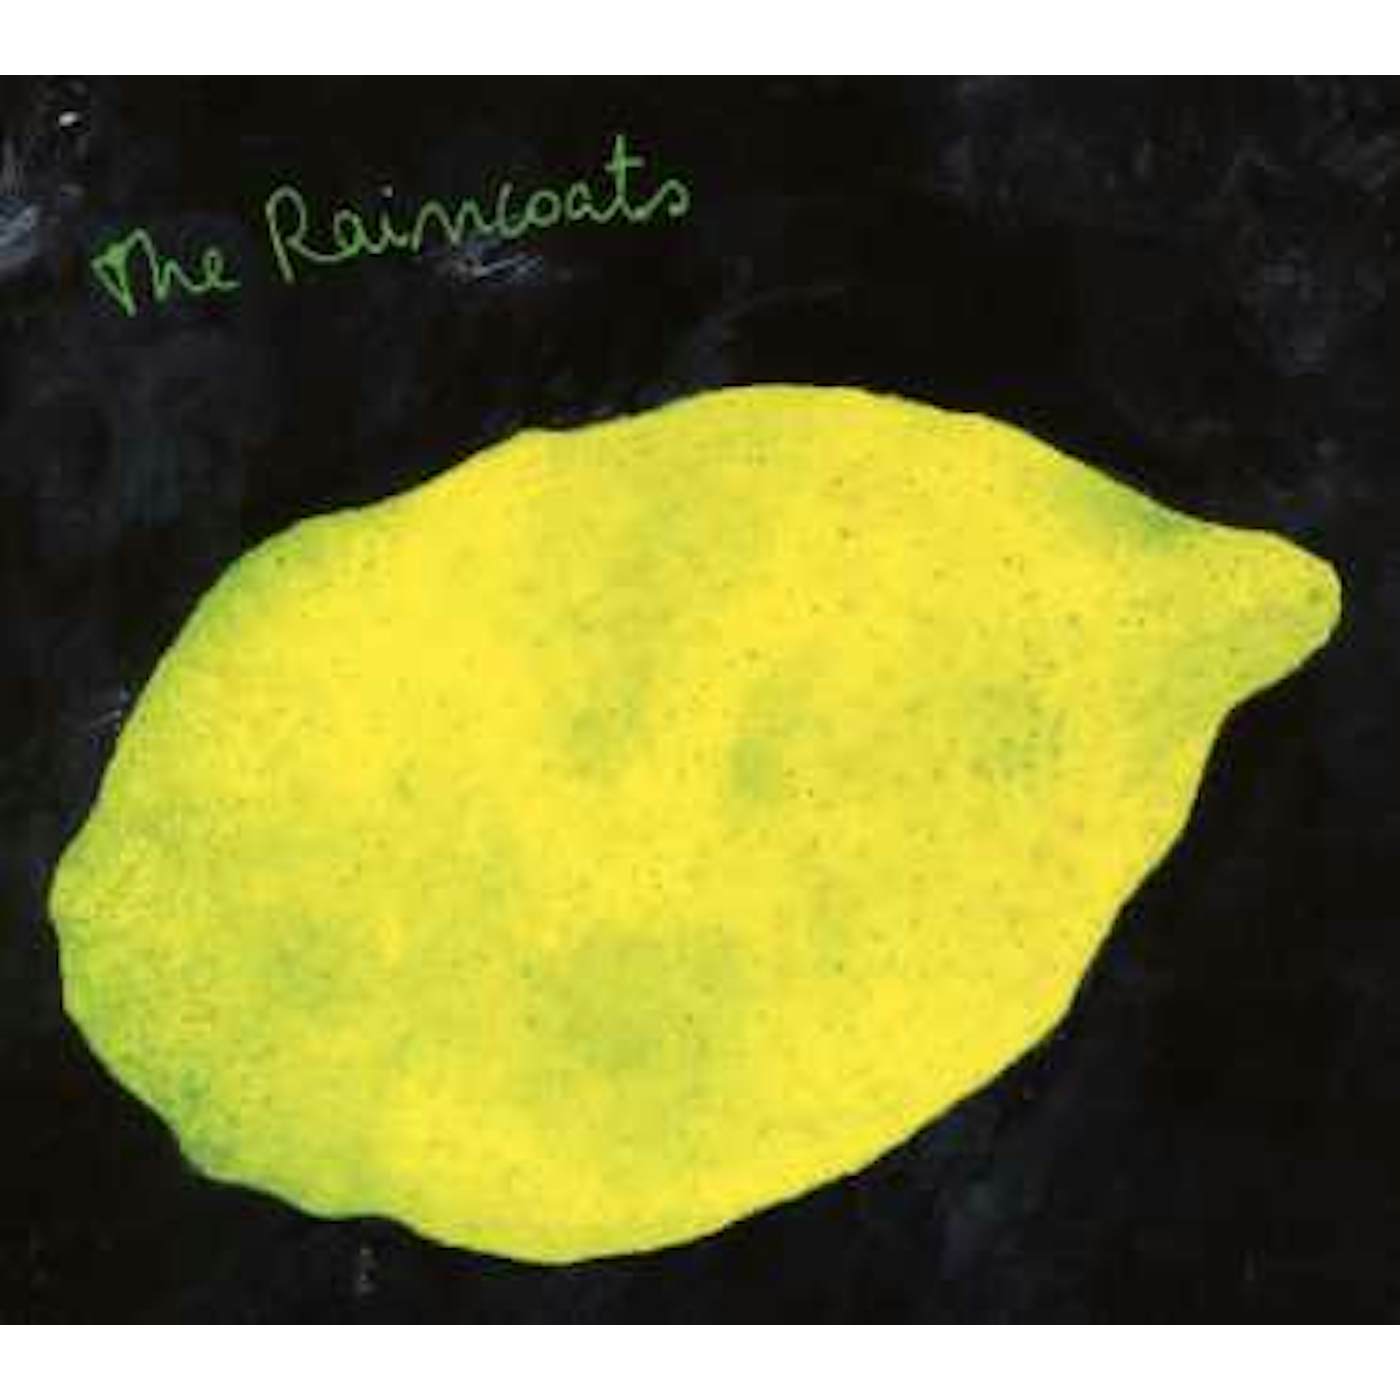 The Raincoats EXTENDED PLAY CD